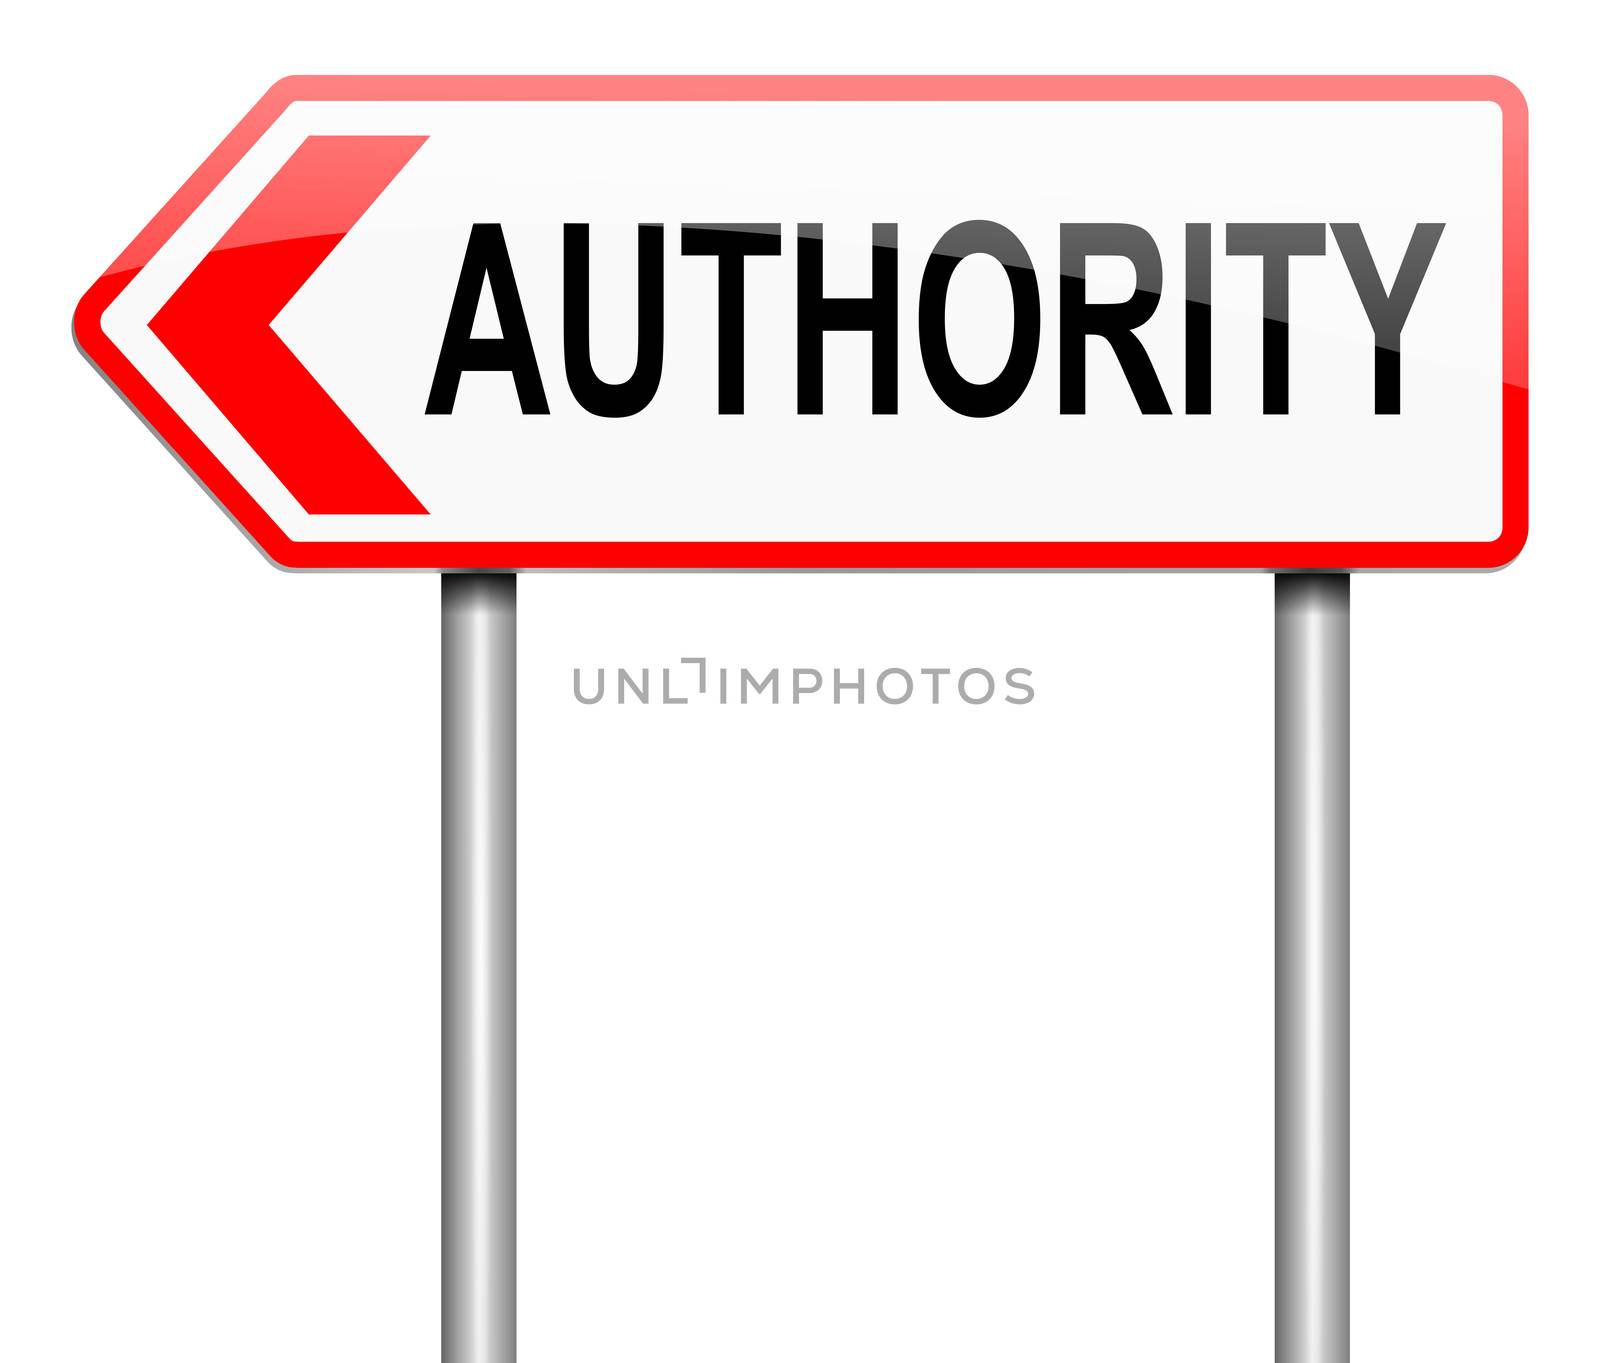 Illustration depicting a sign with an authority concept.